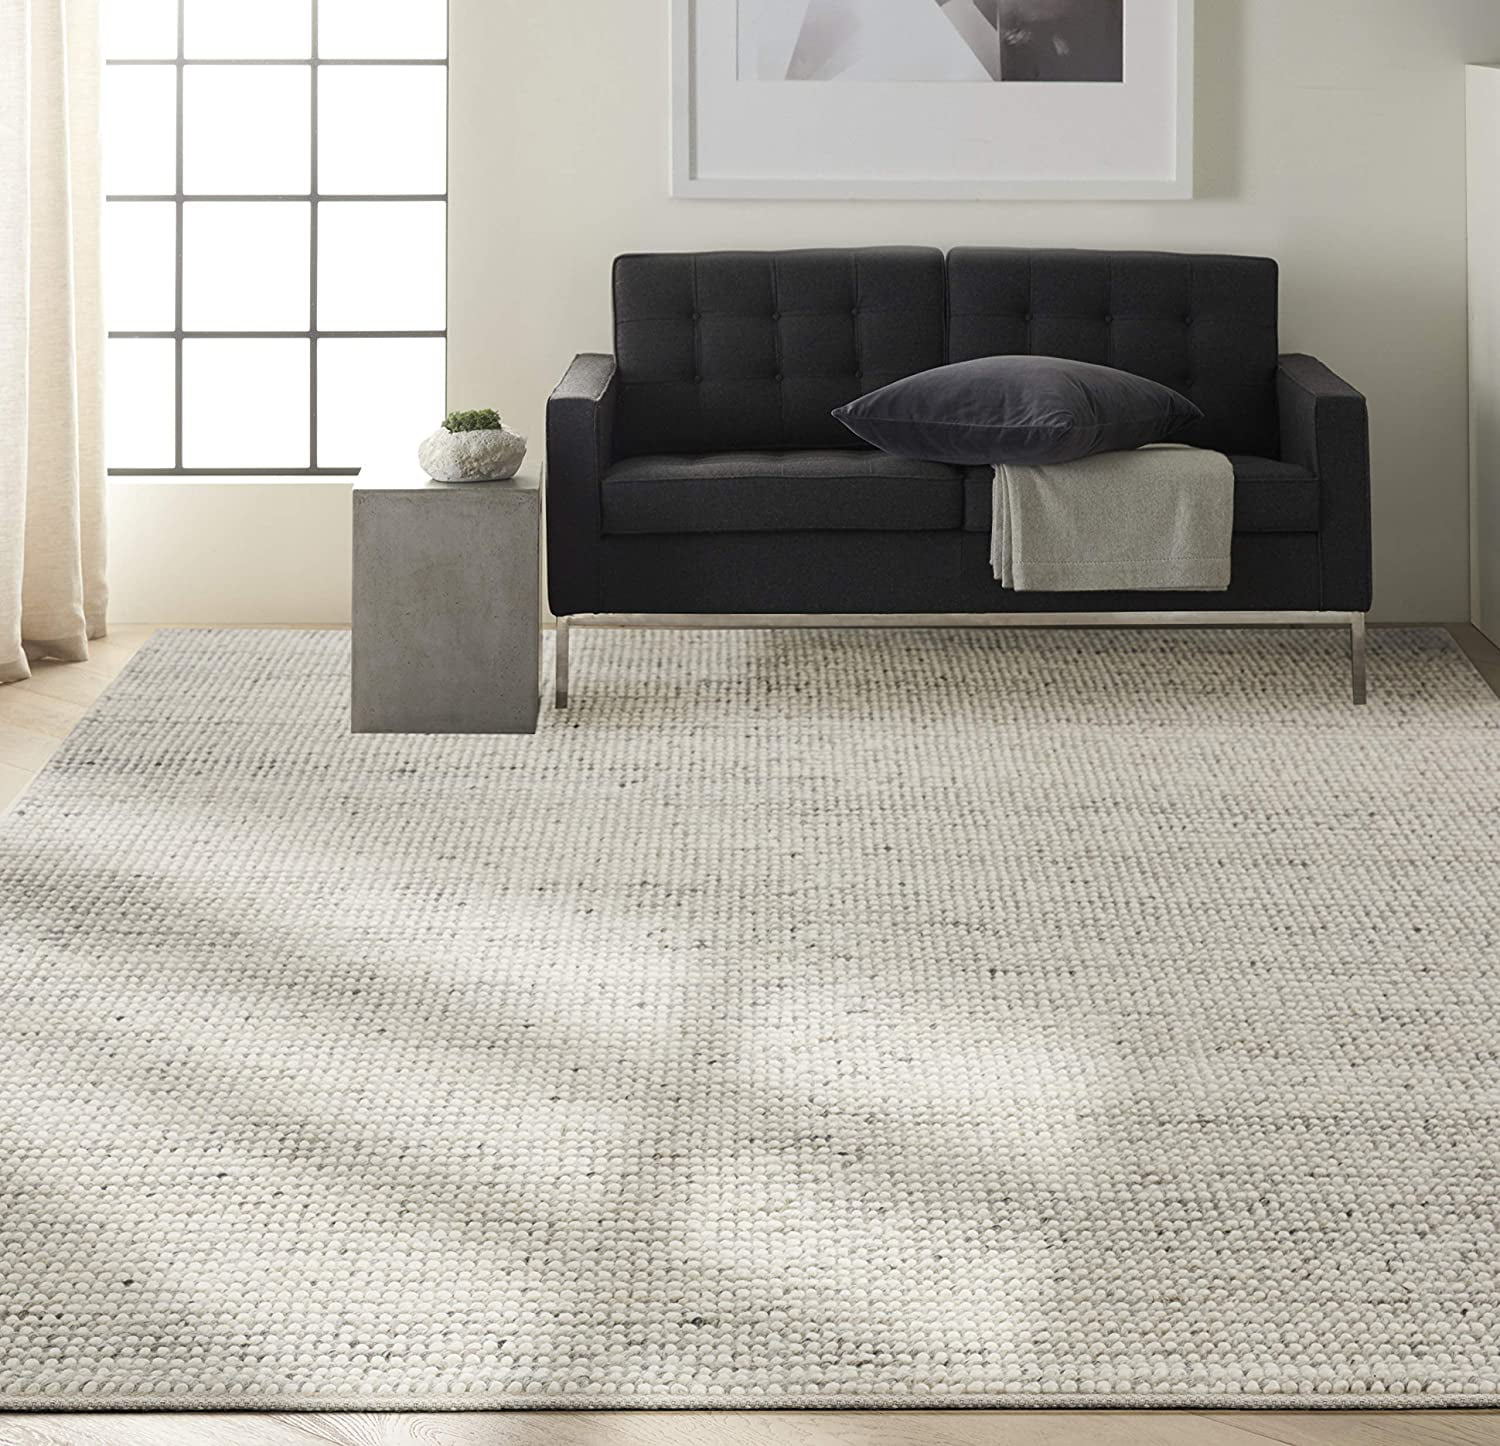 Calvin Klein Textured Dots Silver 79 x 99 Area Rug, Modern, Solid, Easy  Cleaning, Non Shedding, Bed Room, Living Room, Dining Room, Kitchen 8 x 10  